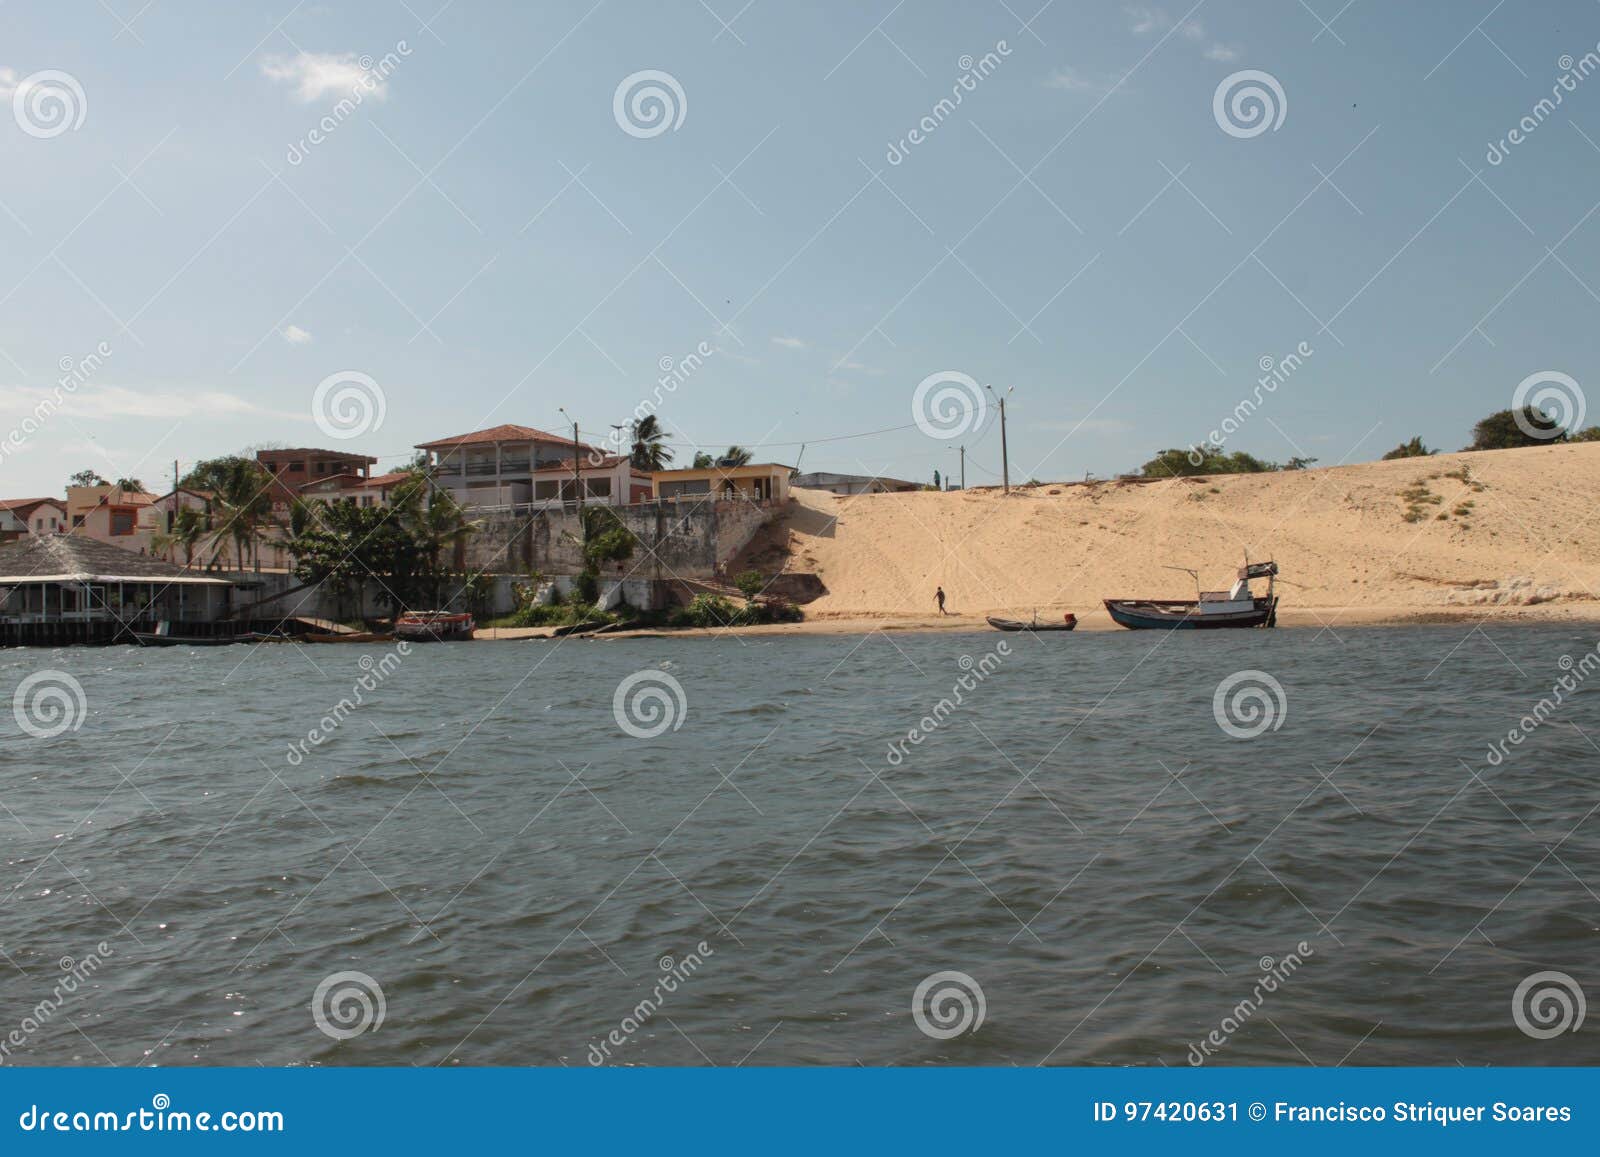 the sand dune and the village